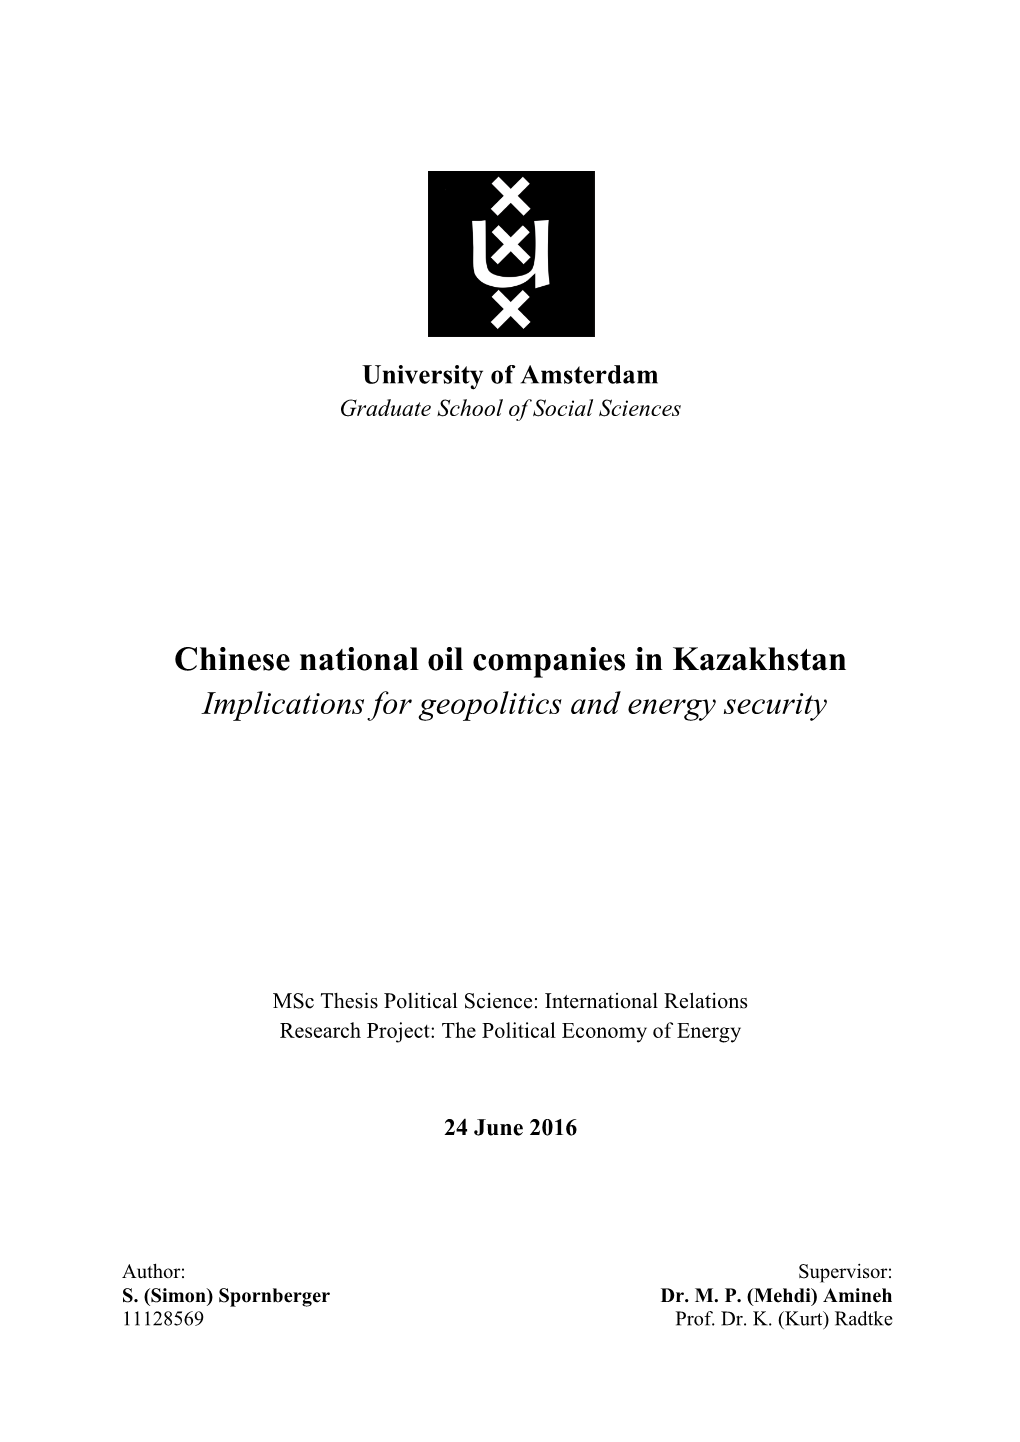 Chinese National Oil Companies in Kazakhstan Implications for Geopolitics and Energy Security